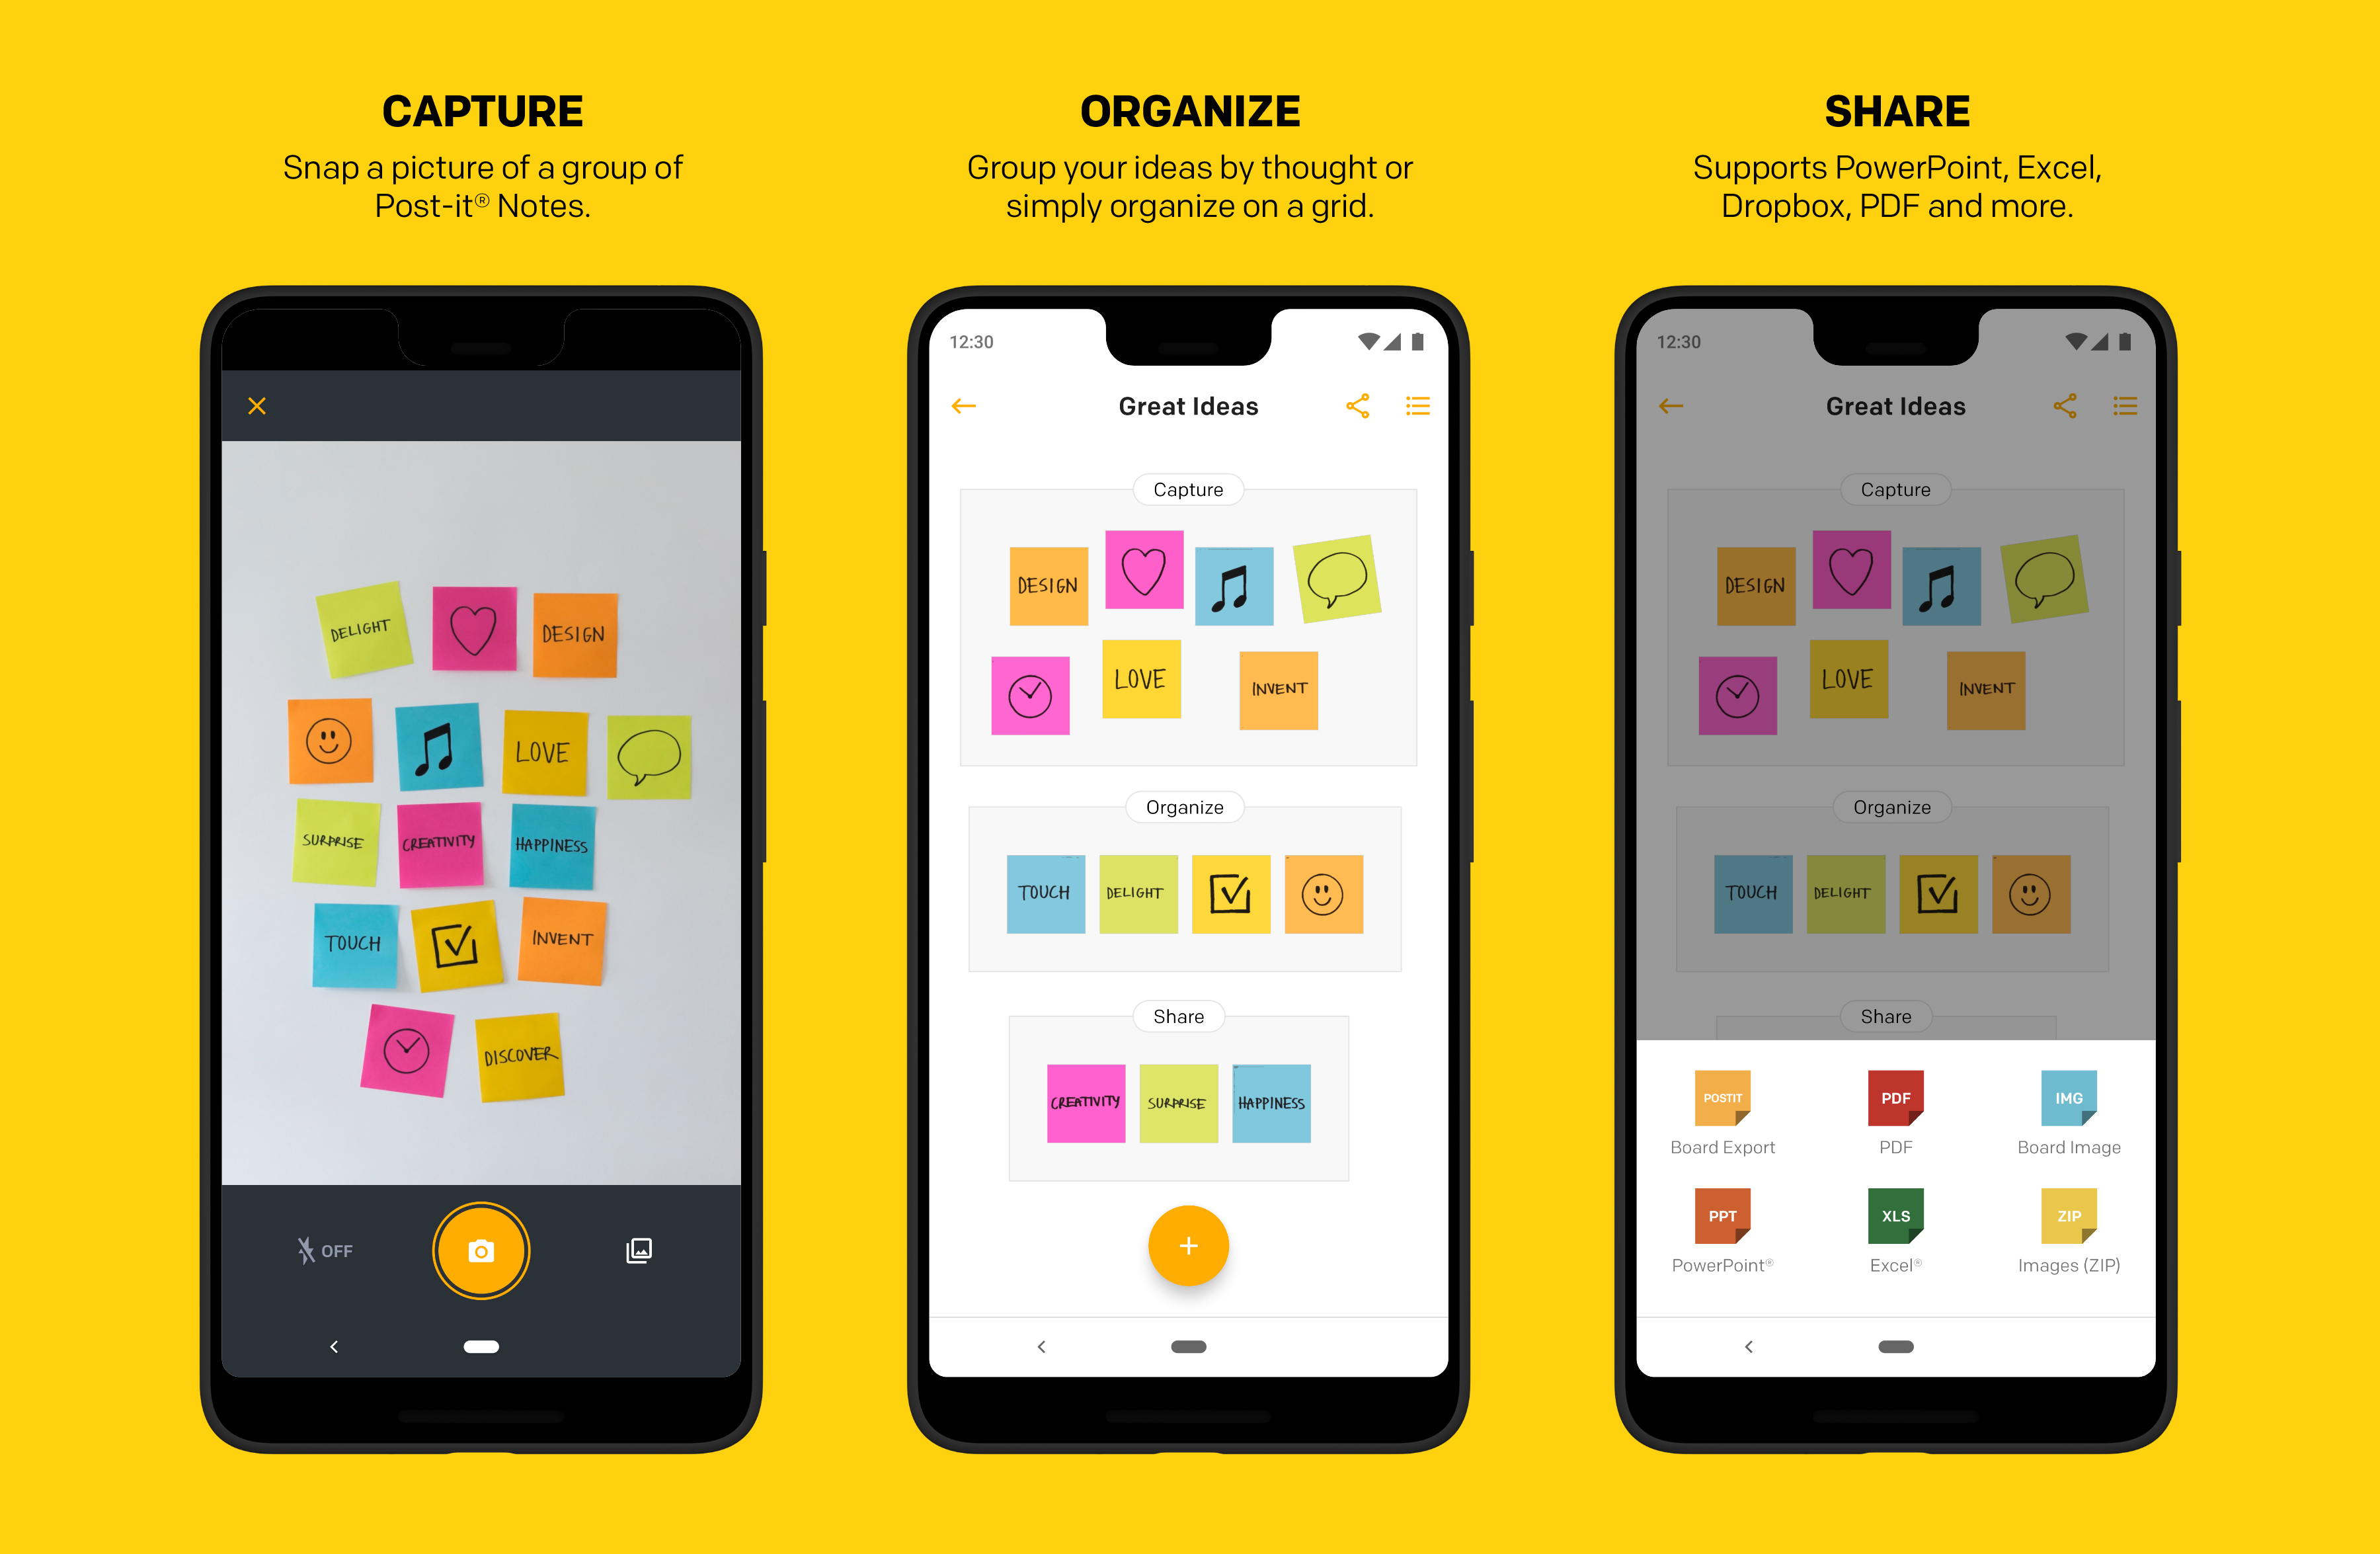 Post-it Brand Releases Innovative Post-it App for Android